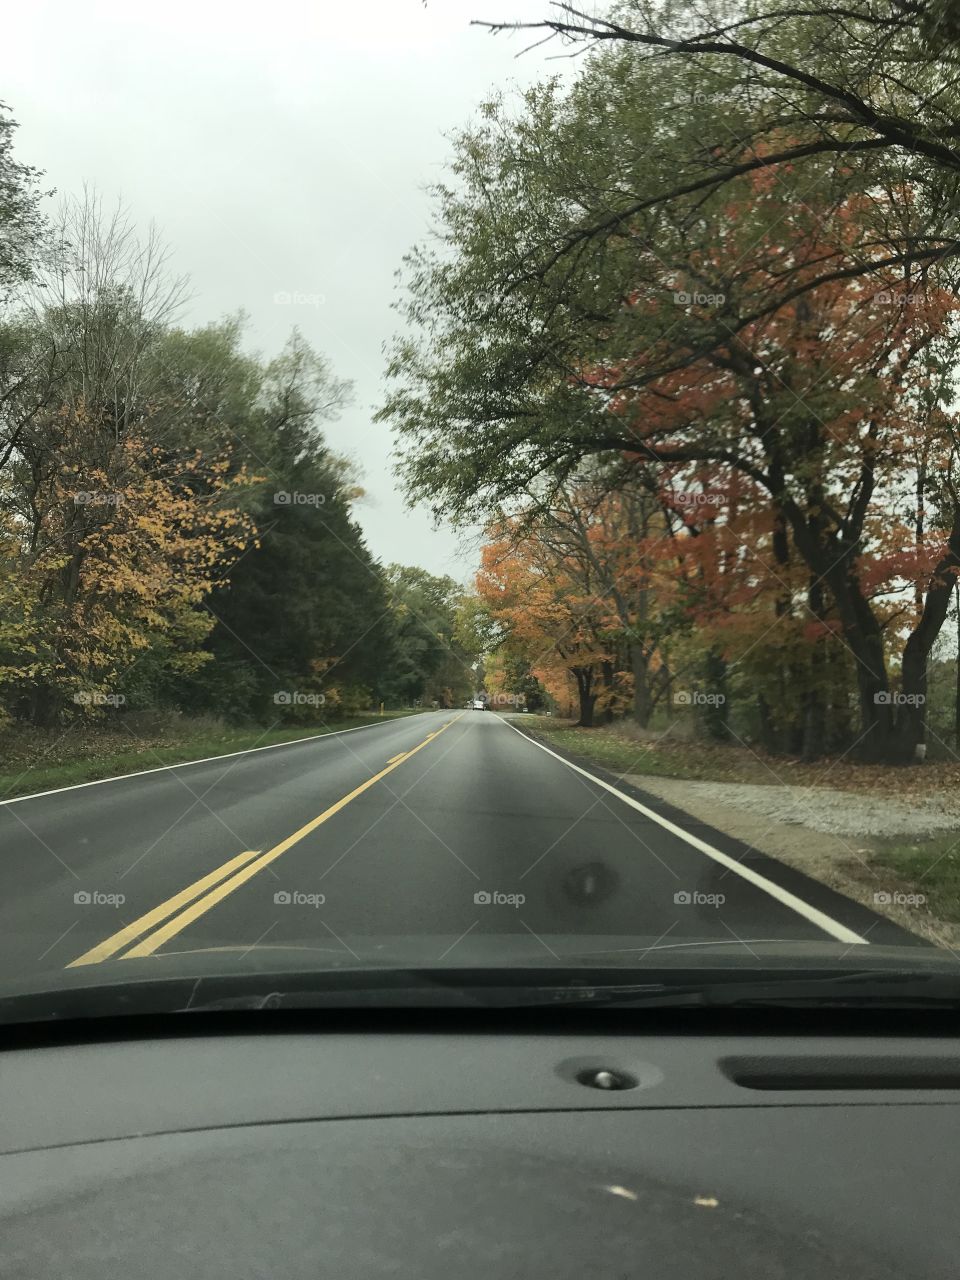 Beautiful autumn leafs last September on my drive through Michigan. Nature surely is wonderful. 